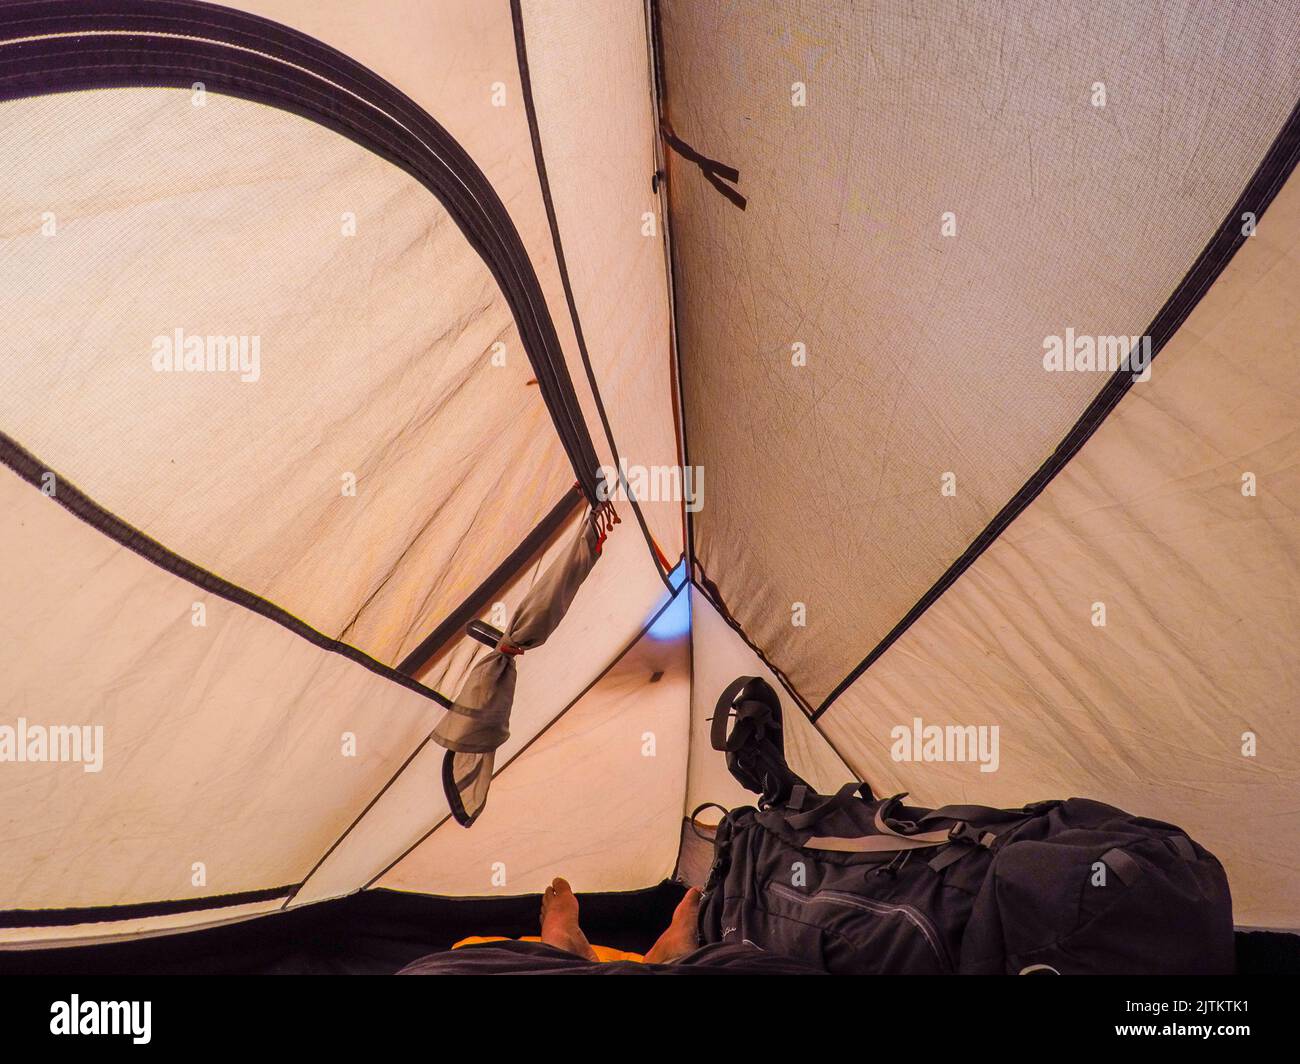 man lying inside a closed camping tent. Stock Photo